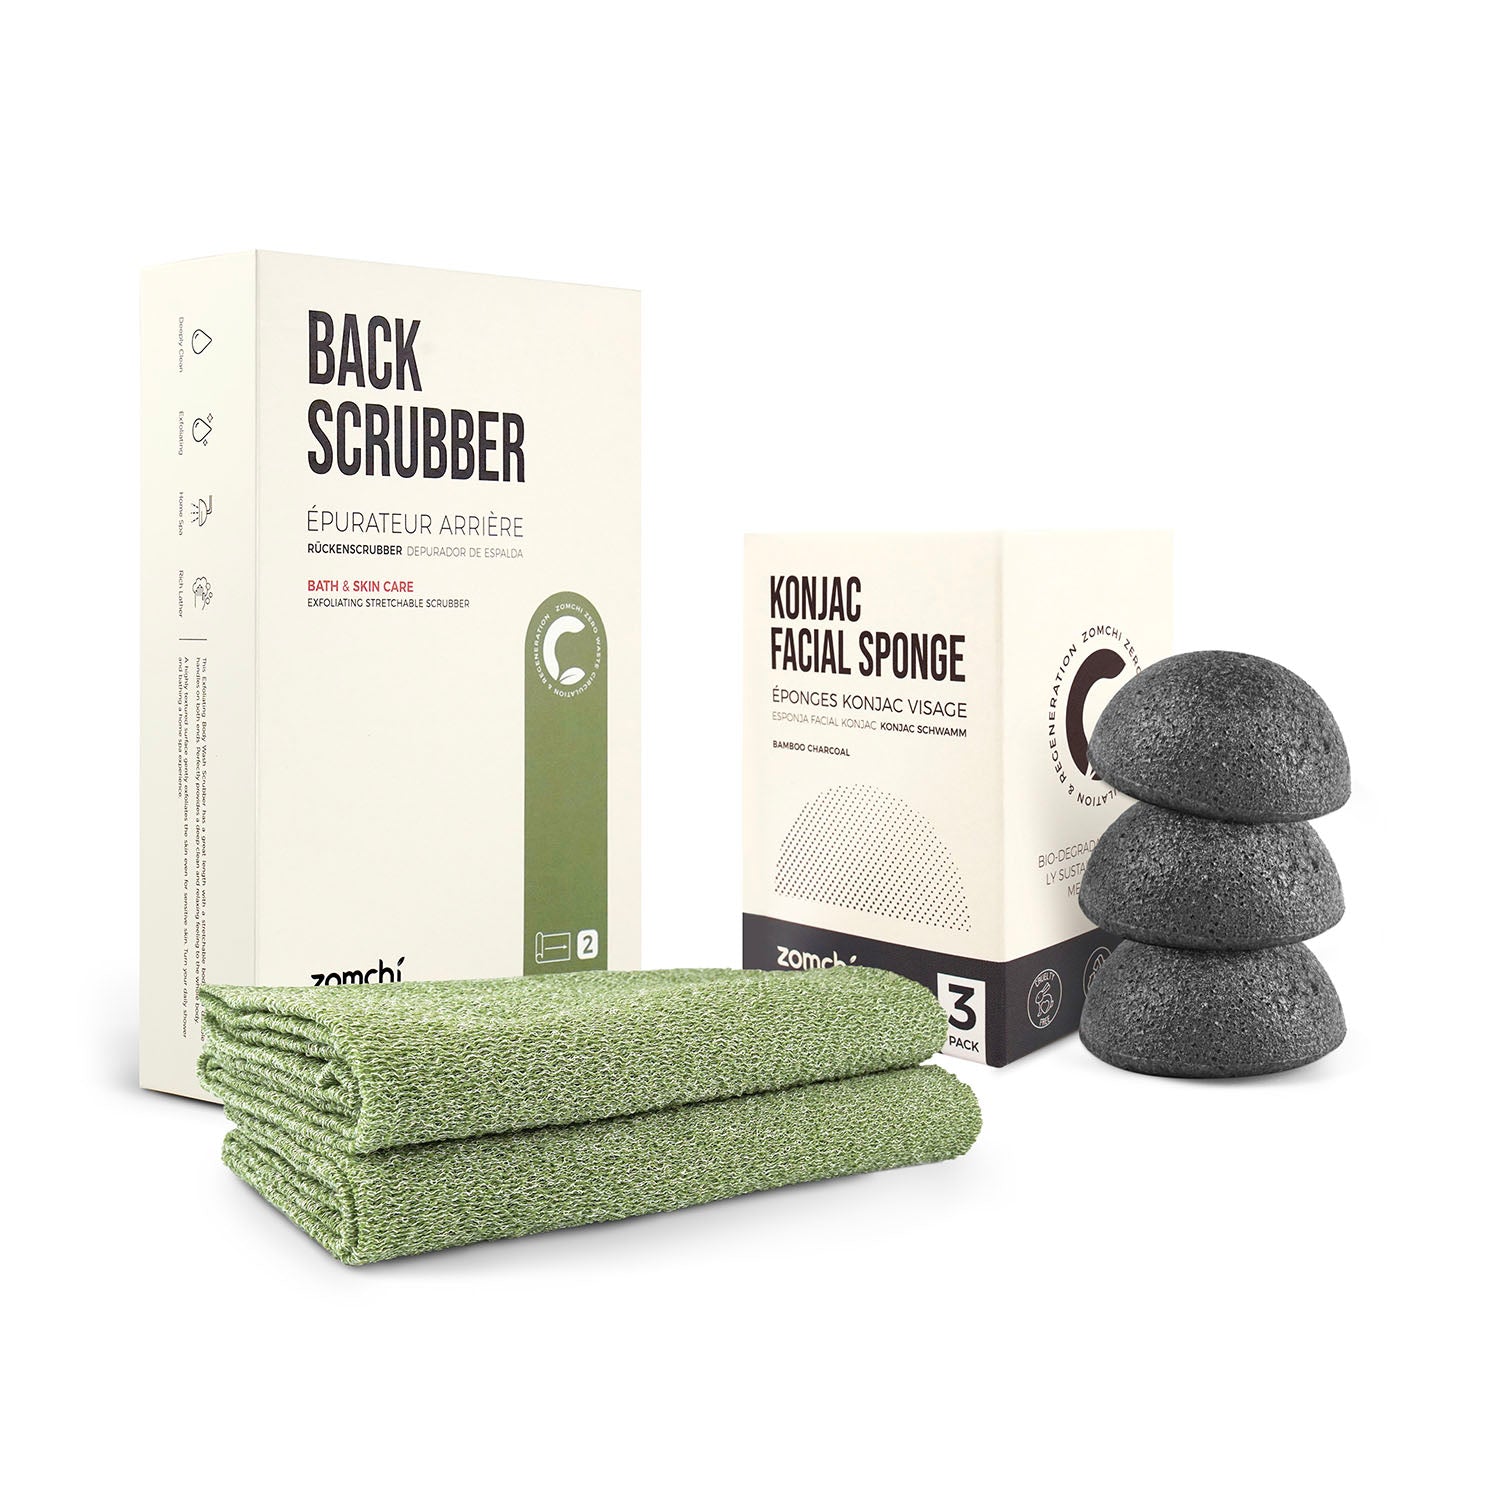 2 Pieces Green Exfoliating Back Scrubber with Facial Sponges